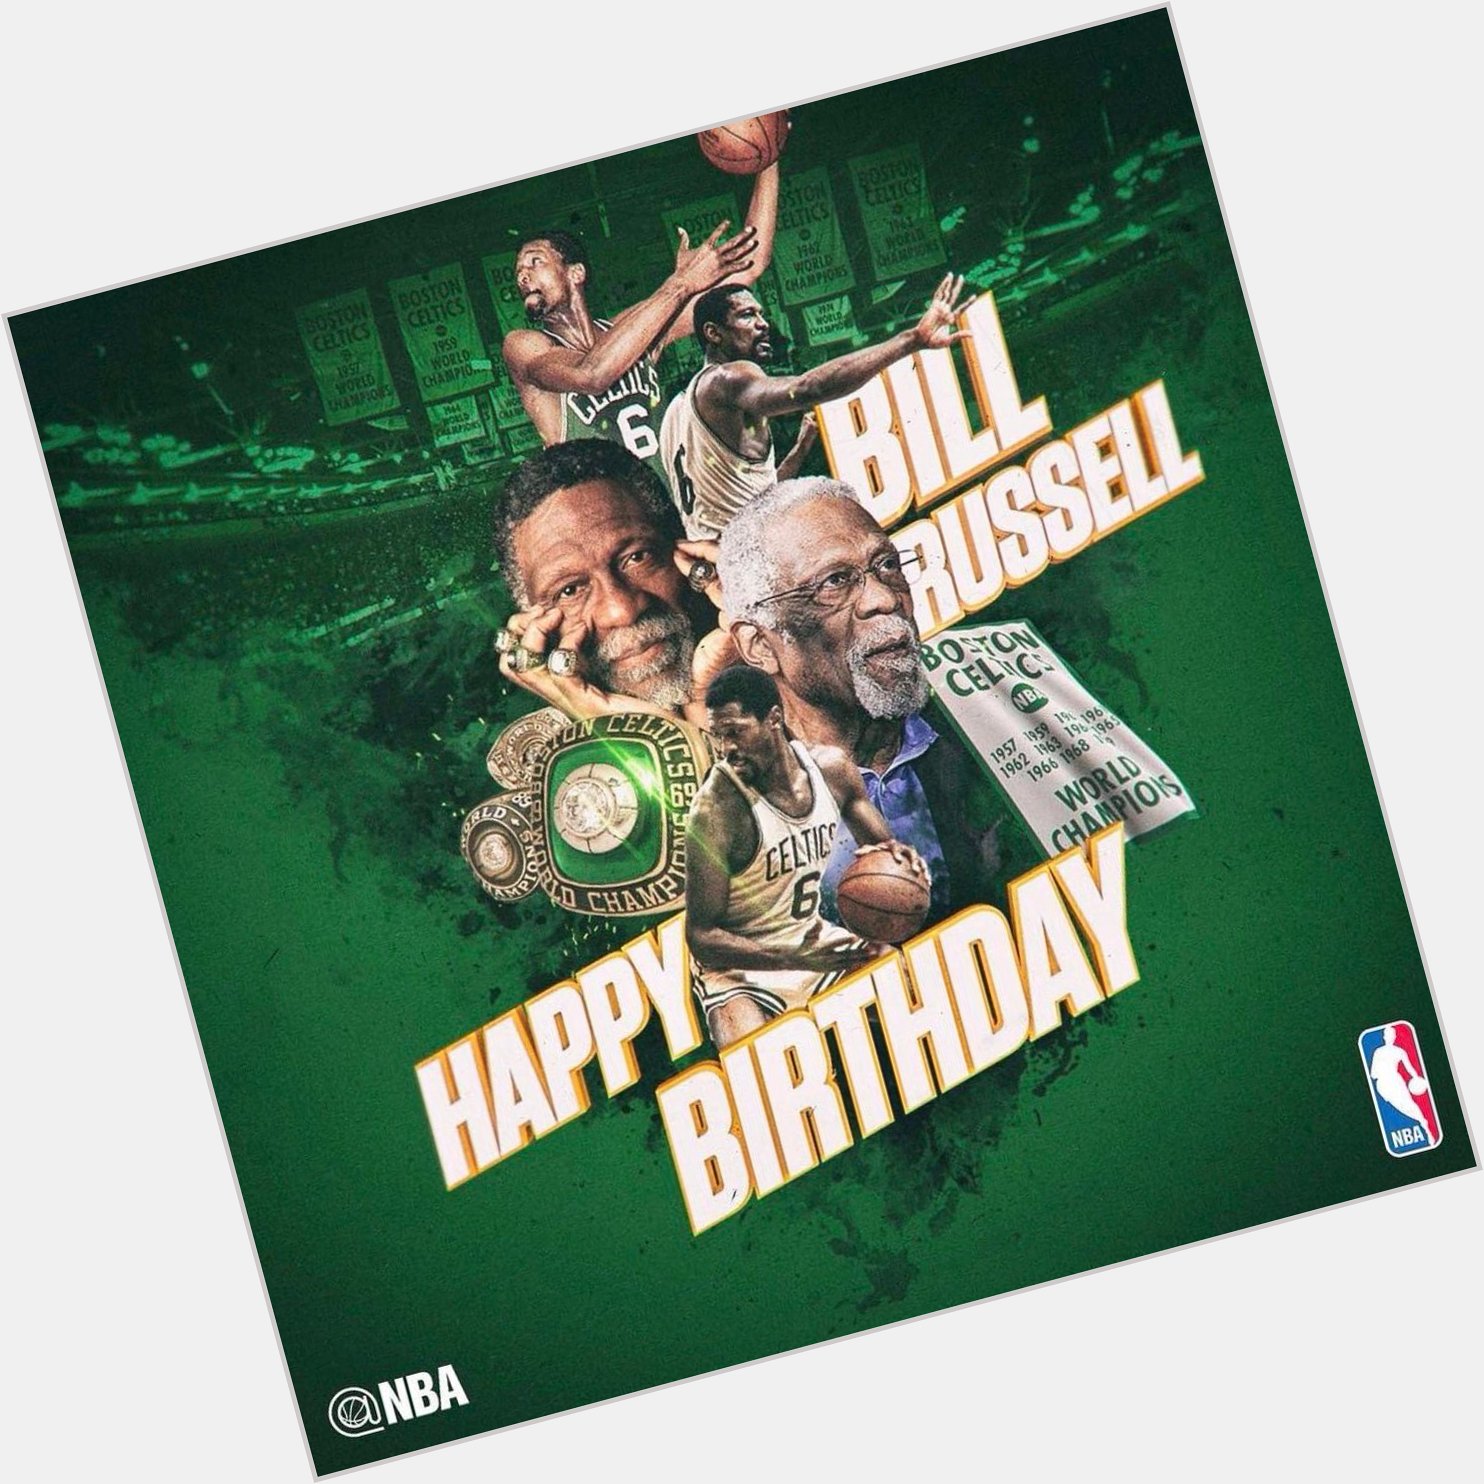 To wish Legend Bill Russell a happy birthday! 